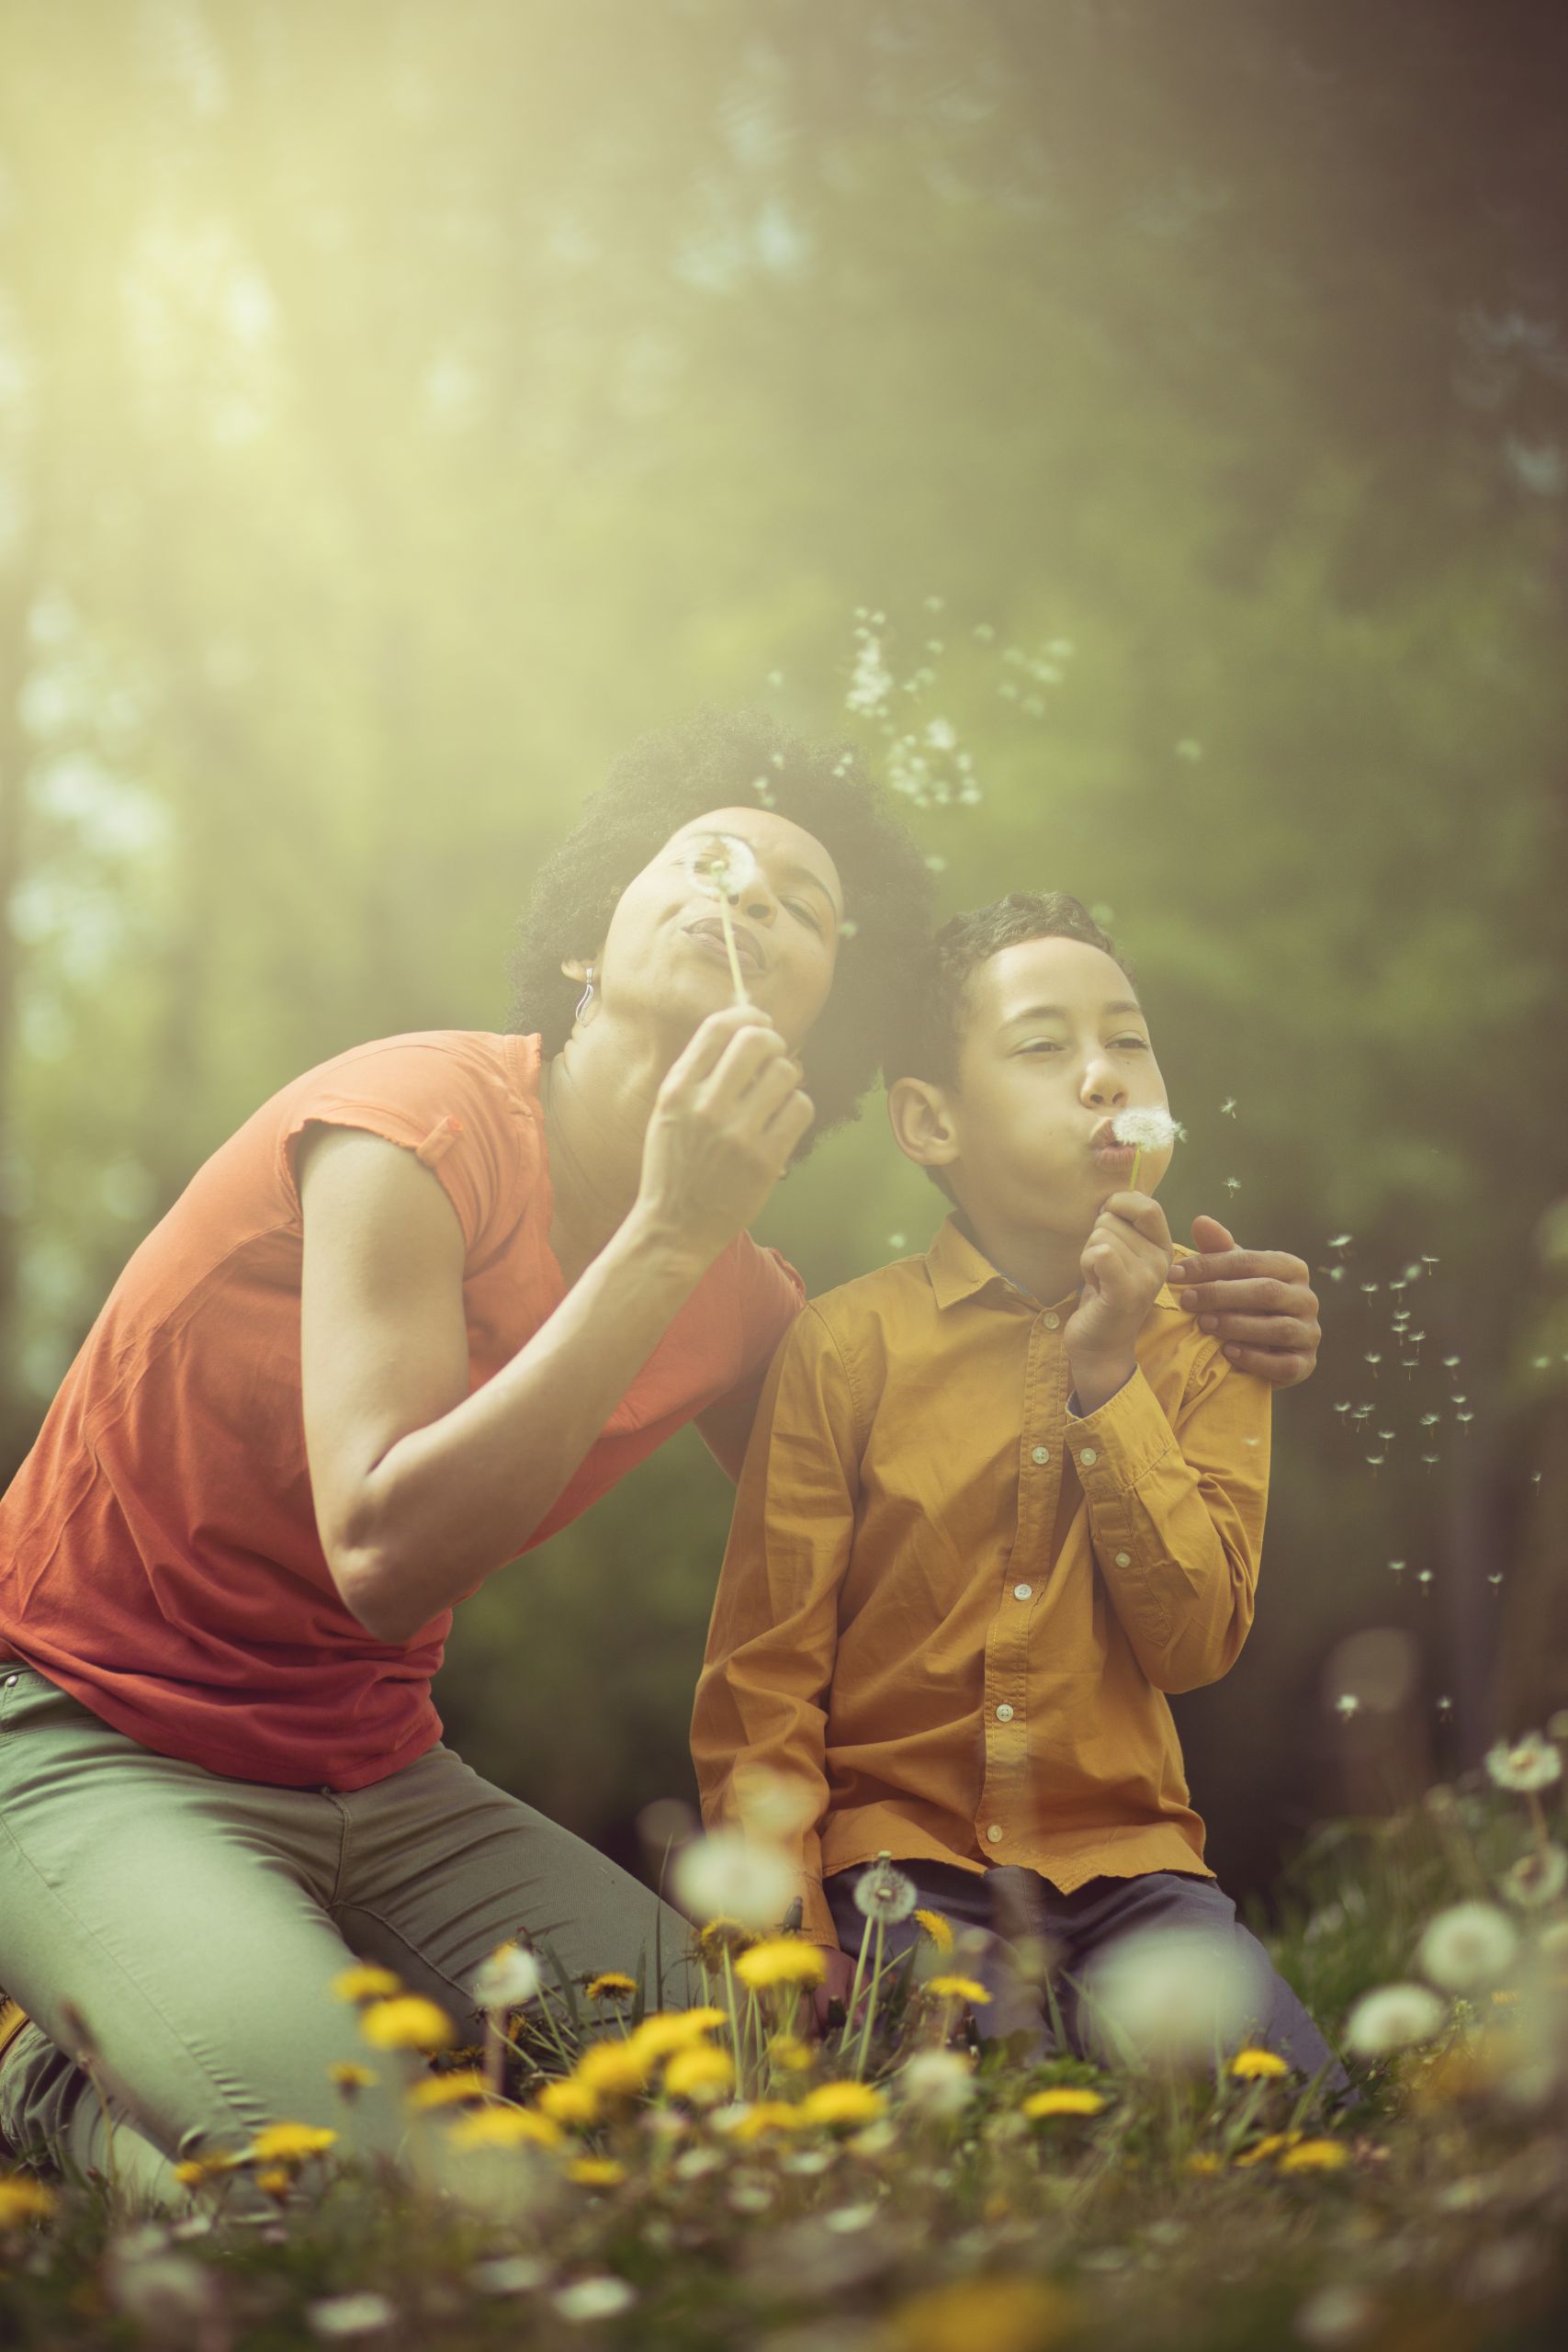 Adult and child blowing on dandilions.